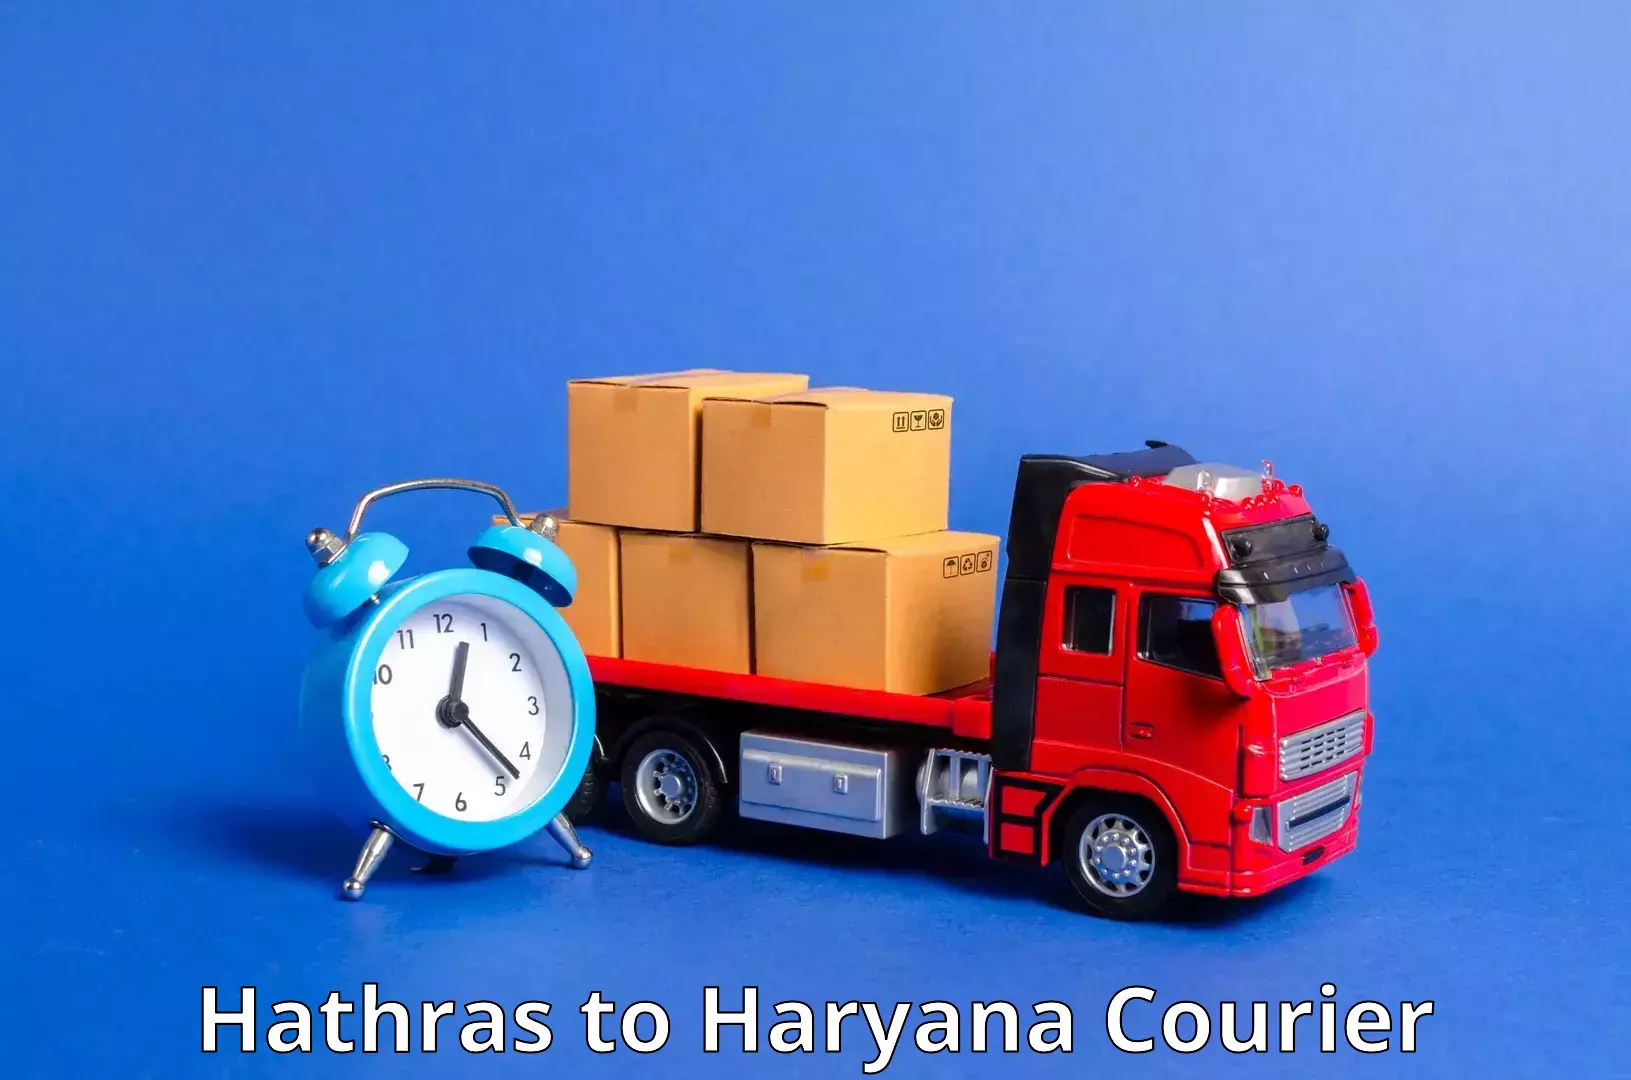 Comprehensive shipping services in Hathras to Jhajjar